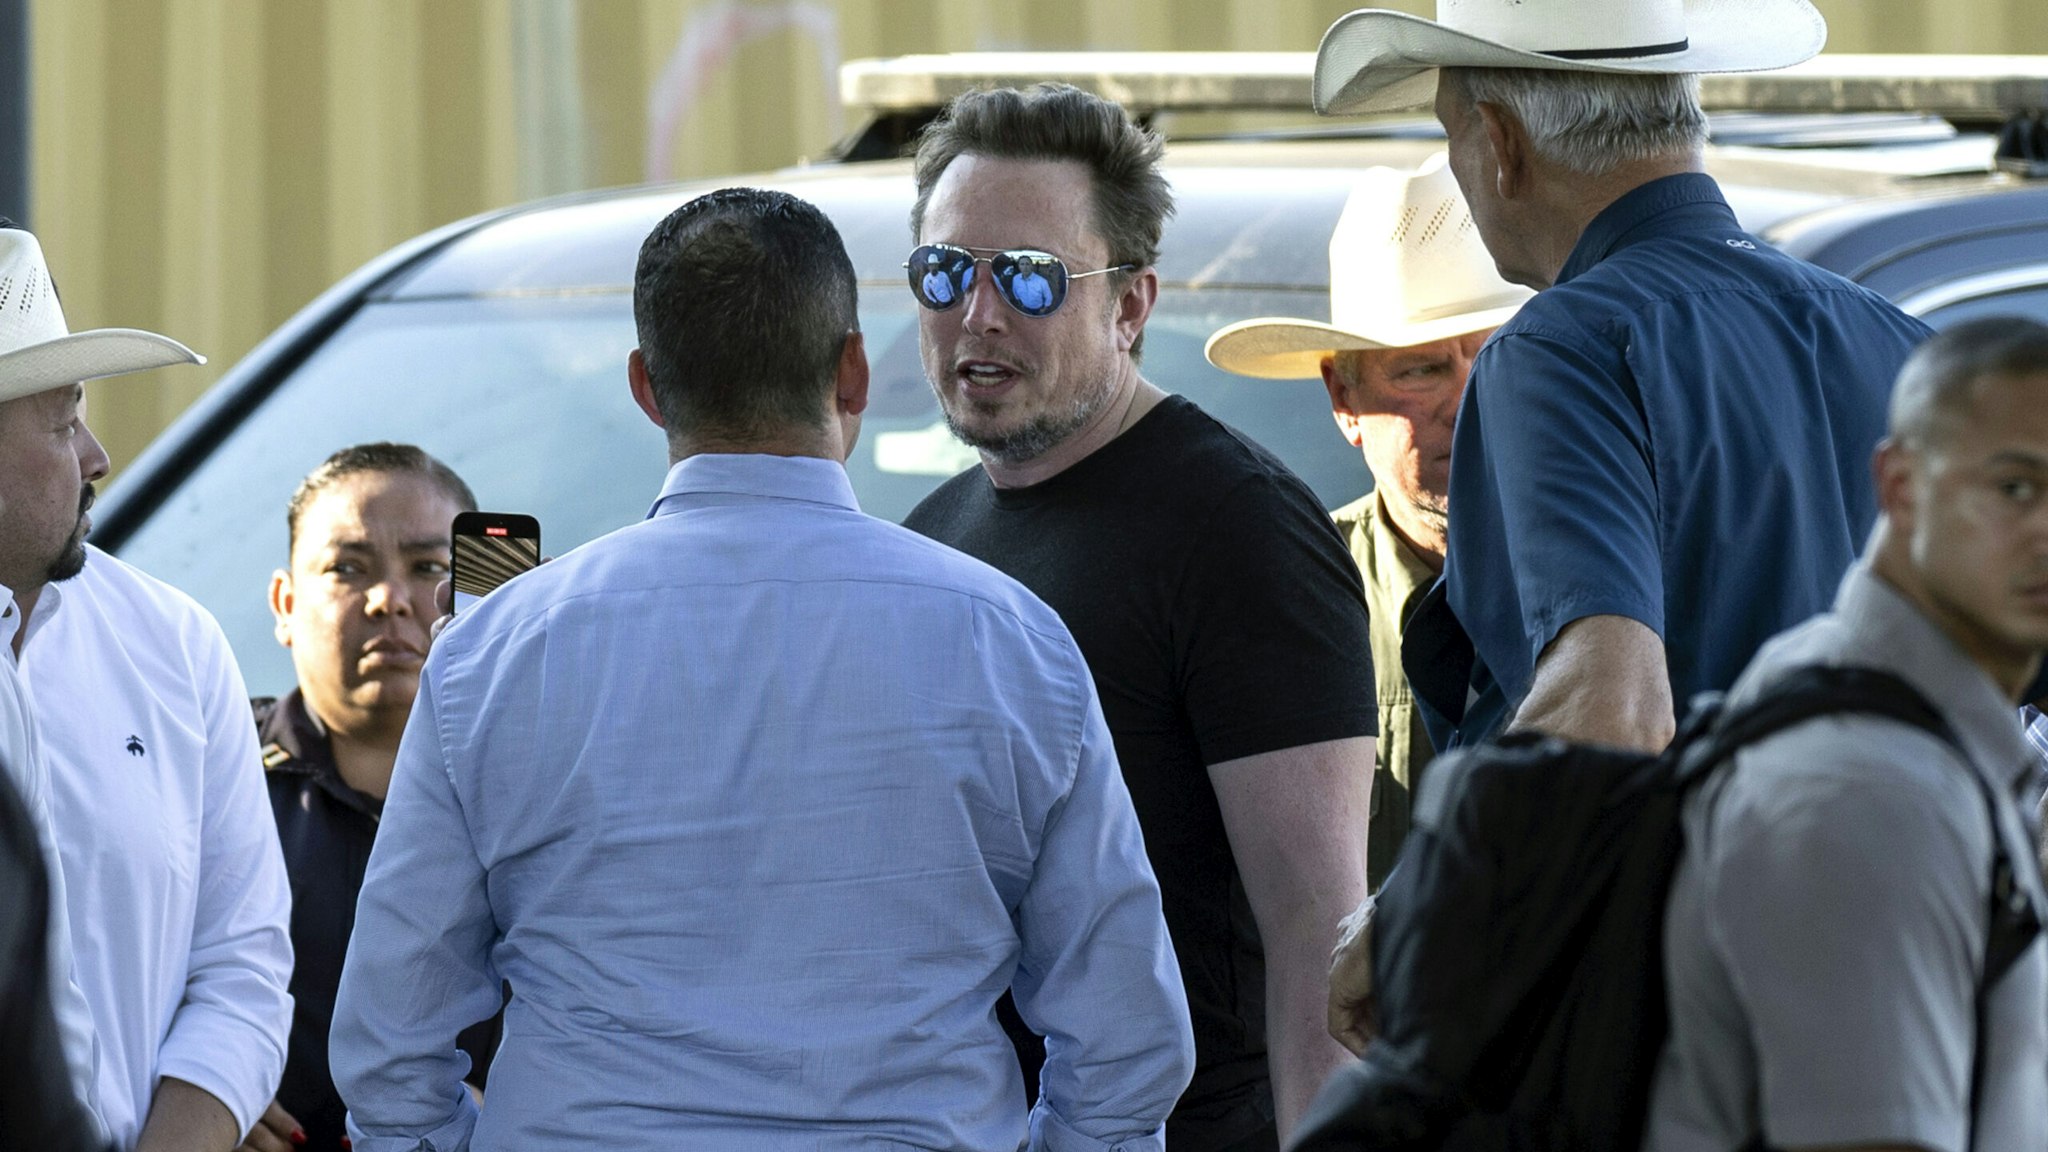 EAGLE PASS, TEXAS - SEPTEMBER 28: Tech entrepreneur Elon Musk with Rep. Tony Gonzales (R-TX) while visiting the Texas-Mexico border on September 28, 2023 in Eagle Pass, Texas. Musk toured the border along the bank of the Rio Grande to see firsthand the ongoing migrant crisis, which he has called a "serious issue."